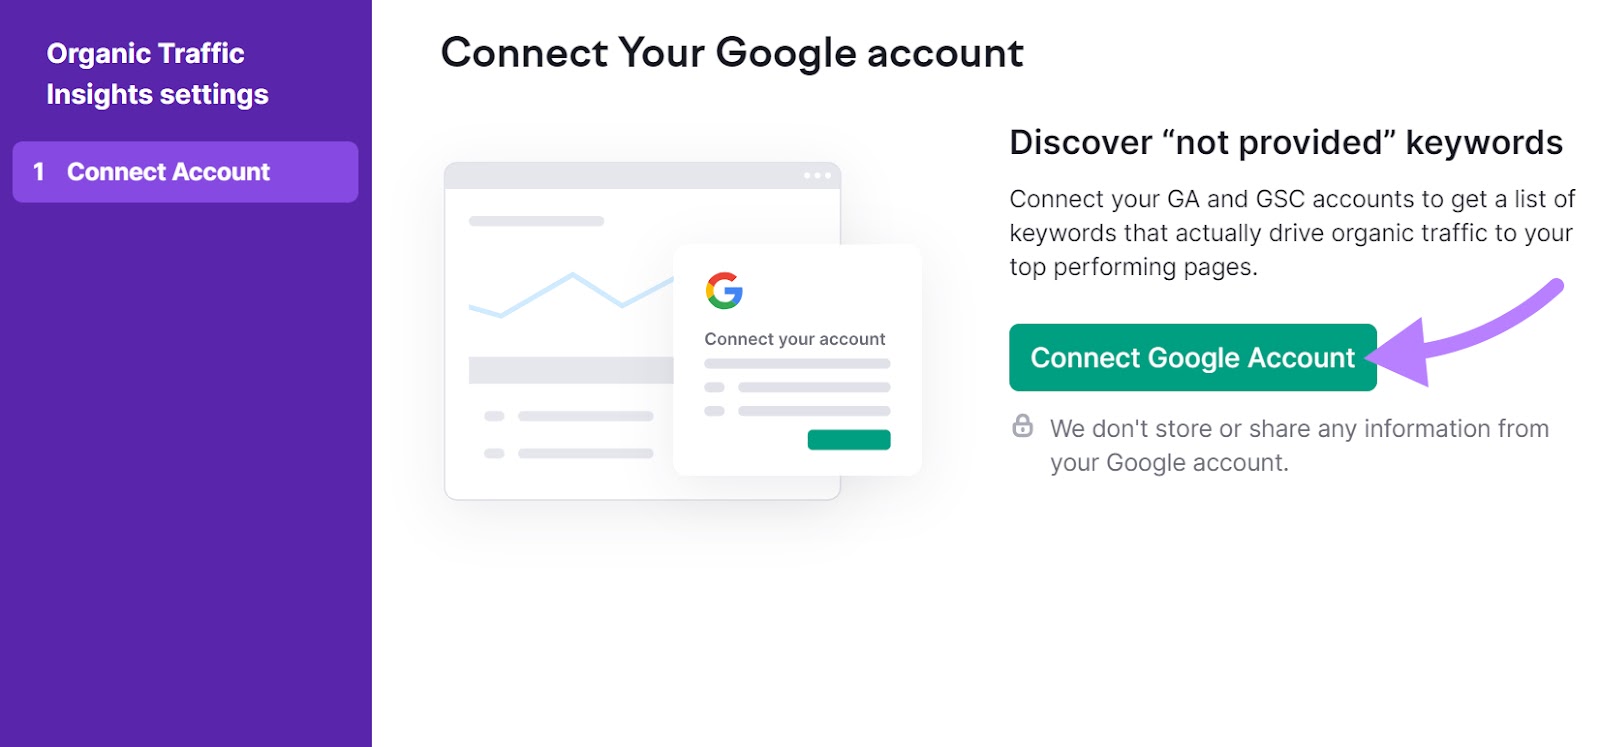 "Connect Google Account" fastener  successful  Organic Traffic Insights tool